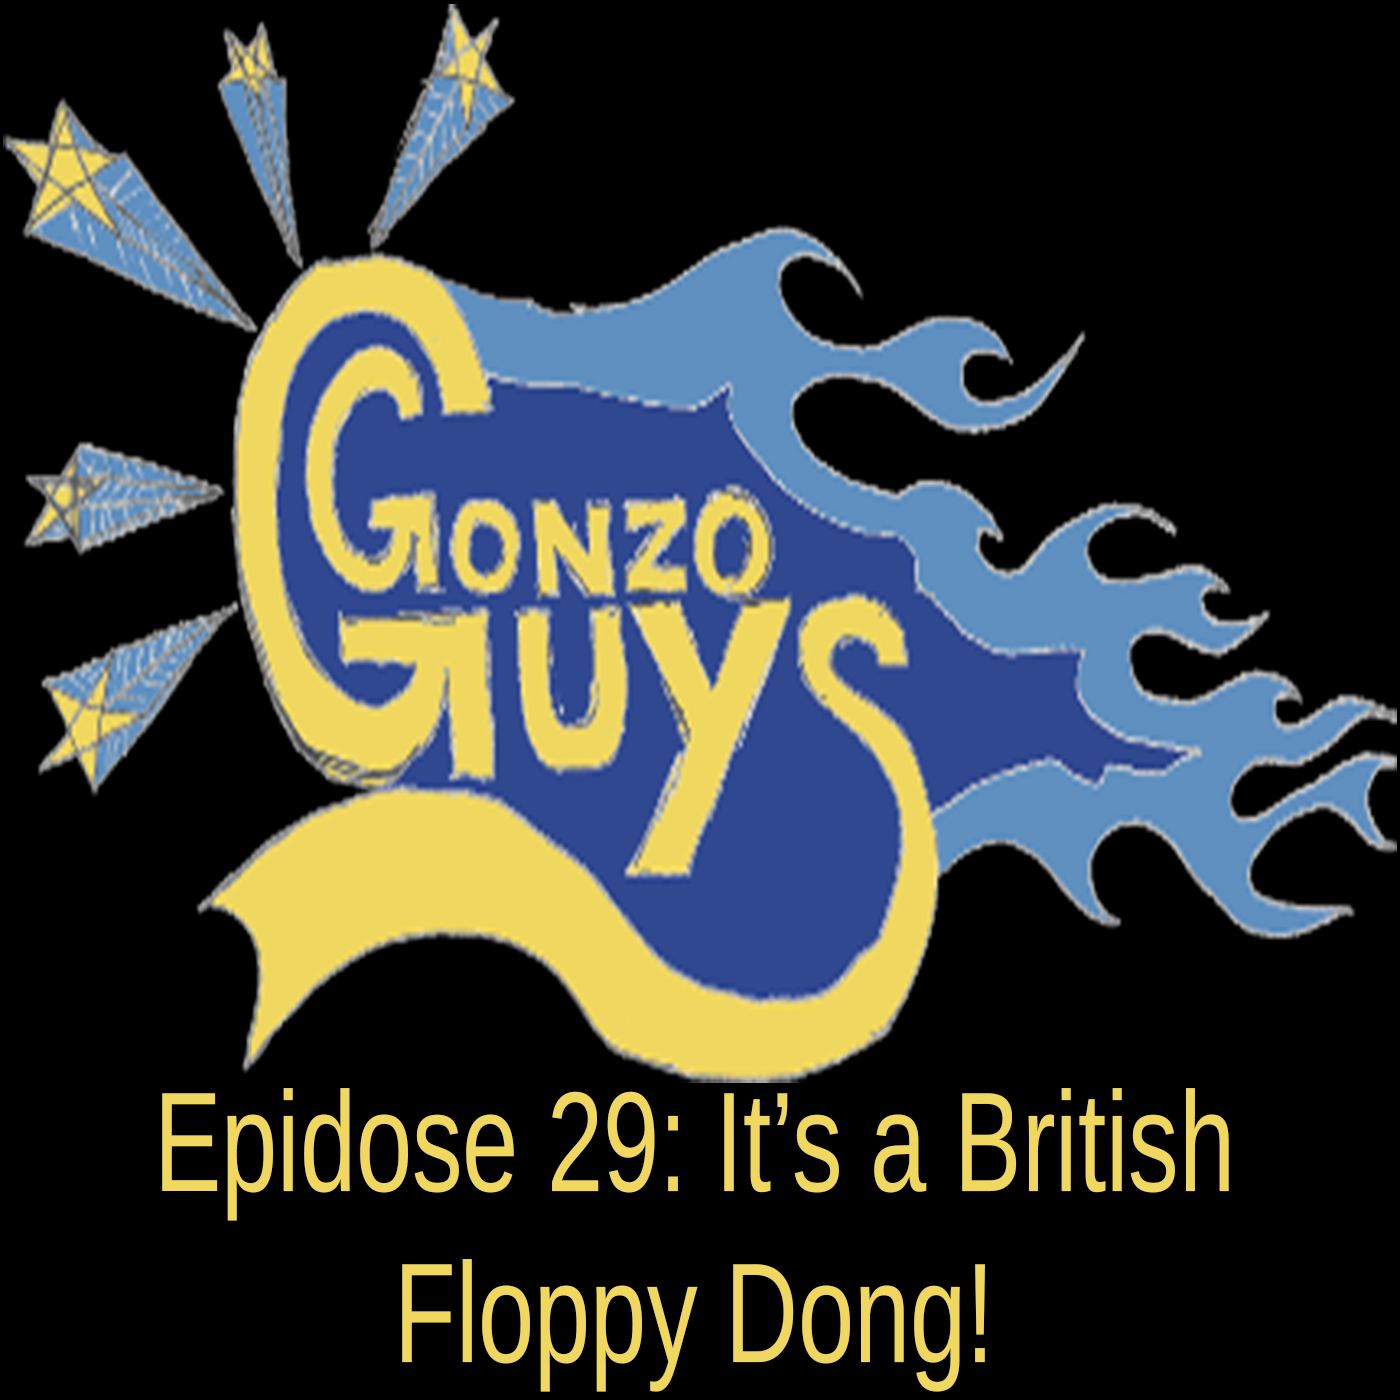 Gonzo Guys Podcast Epidose 29: It's a Floppy British Dong!